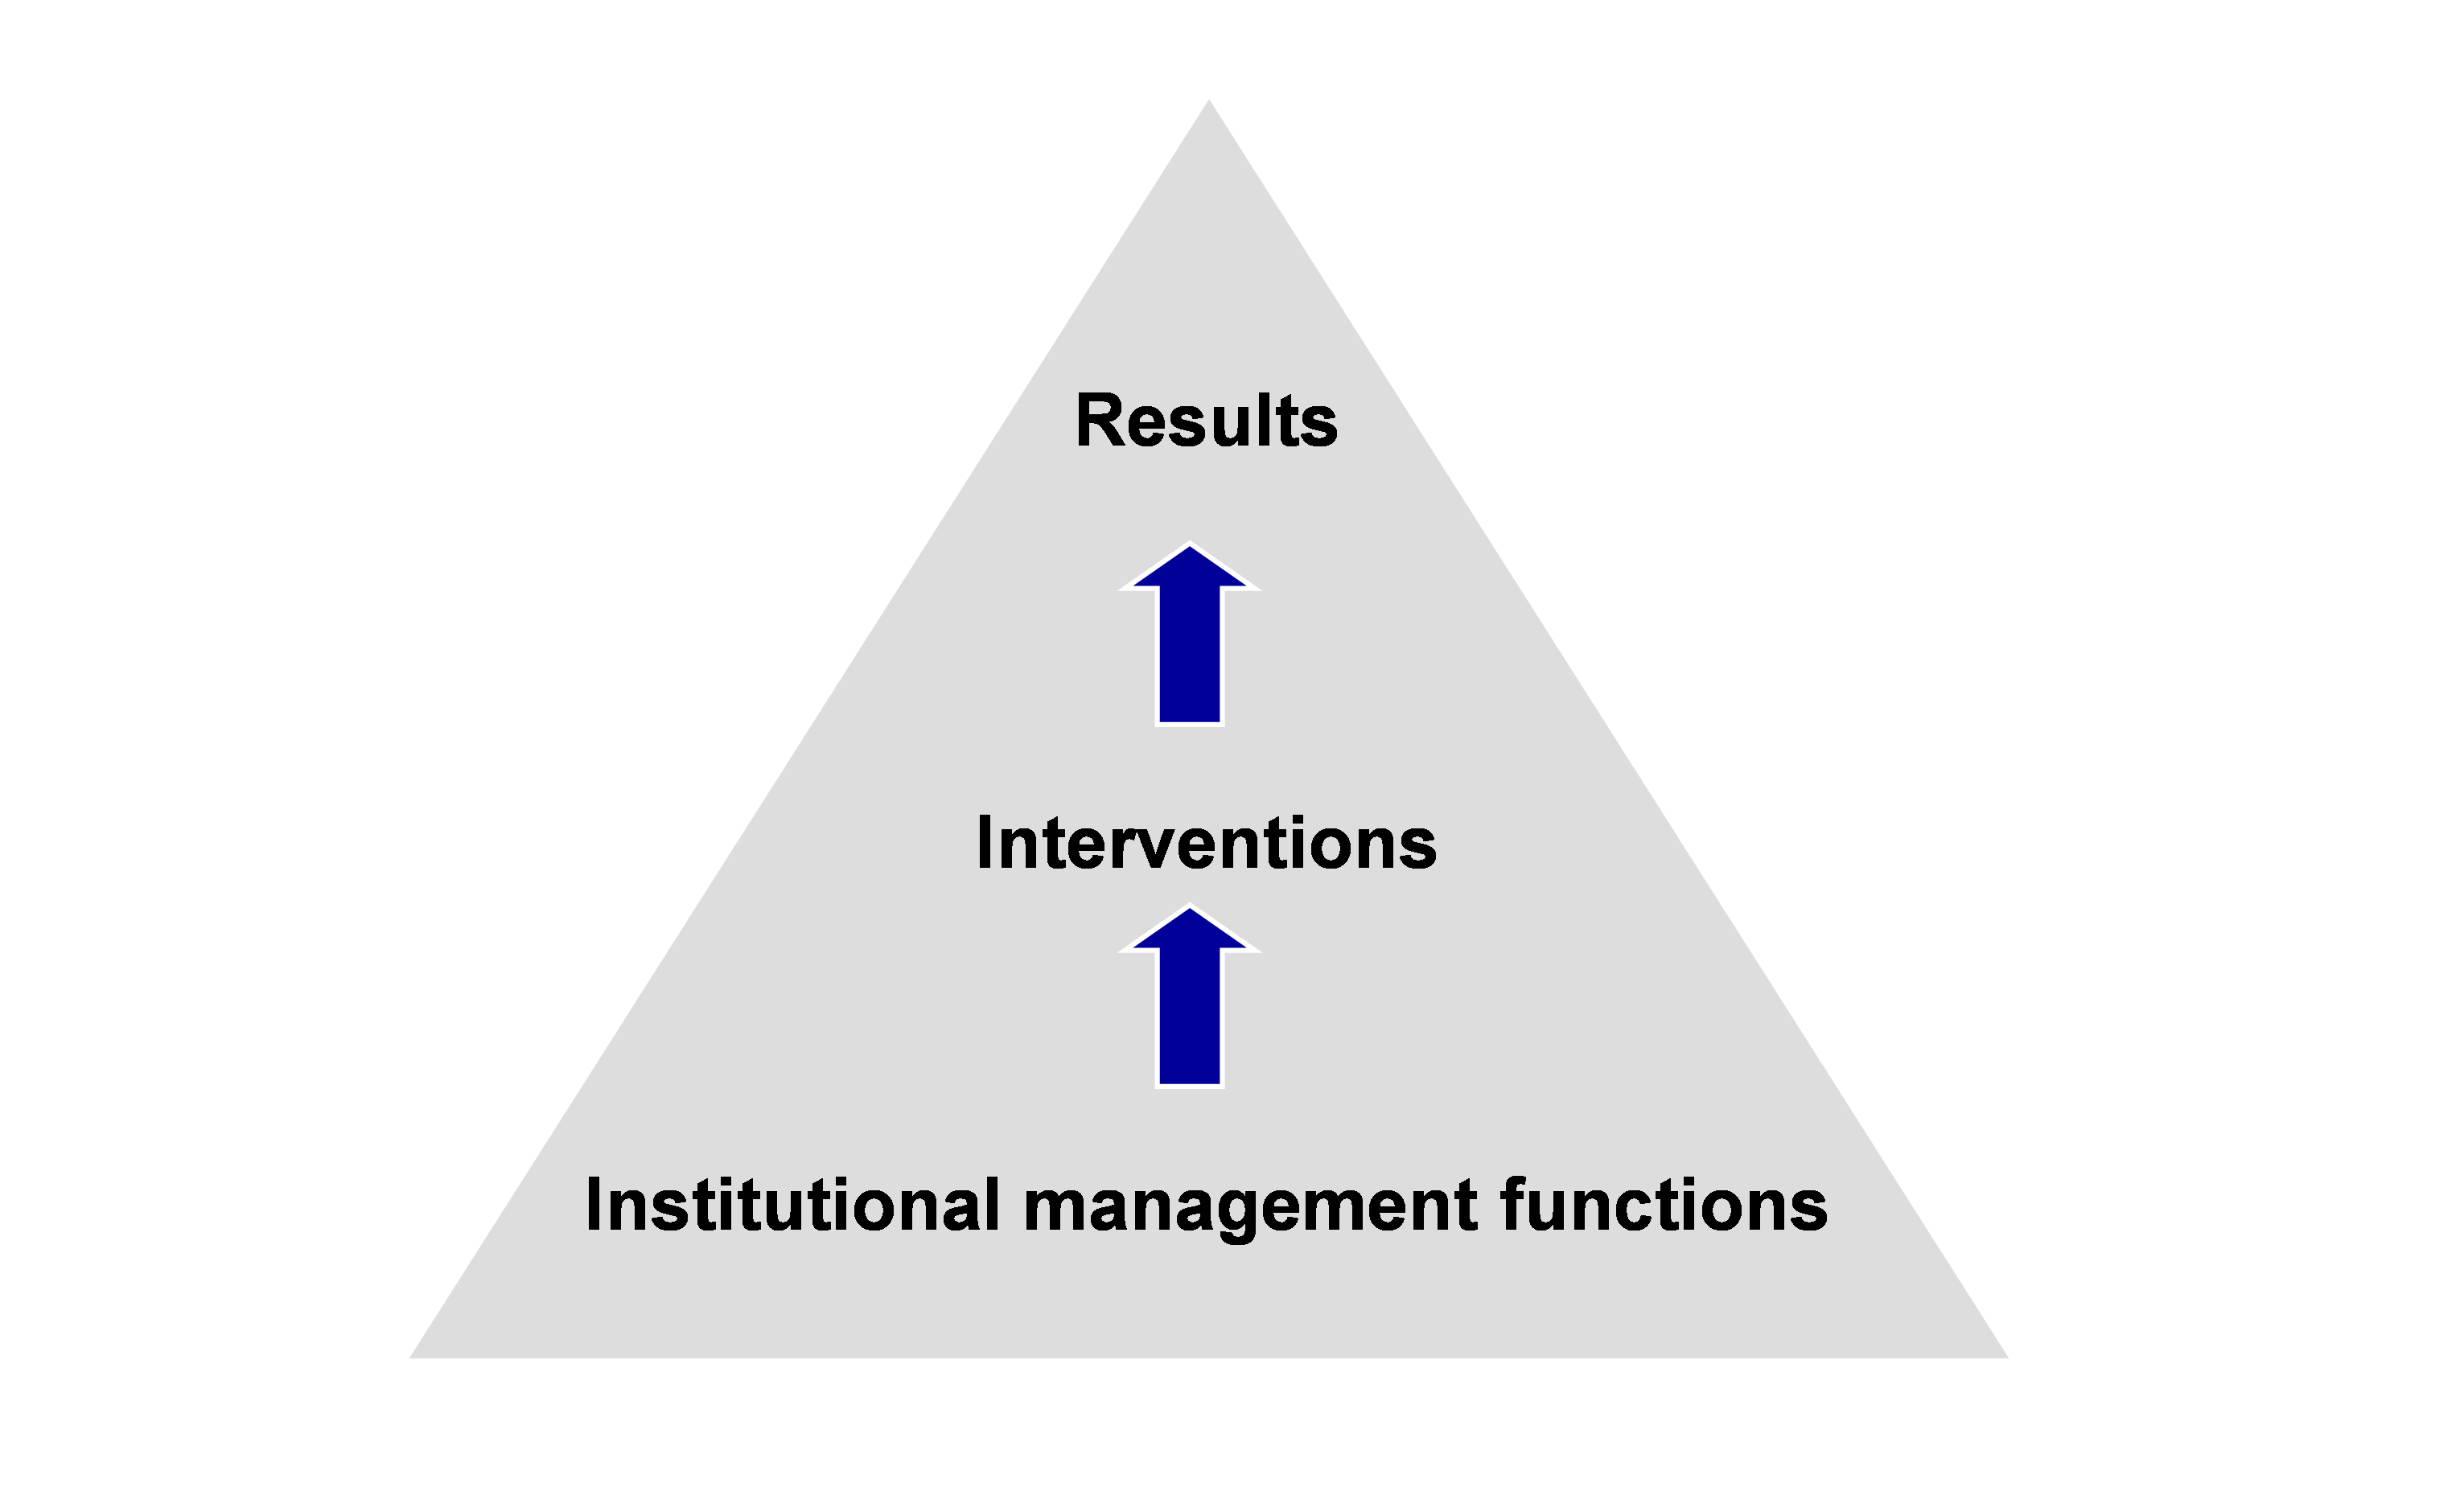 Figure 2.3 Road safety management is a systematic process - Source: GRSF (2009) (building on frameworks of LTSA, 2000; Wegman, 2001; Koornstra et al., 2002; Bliss, 2004).